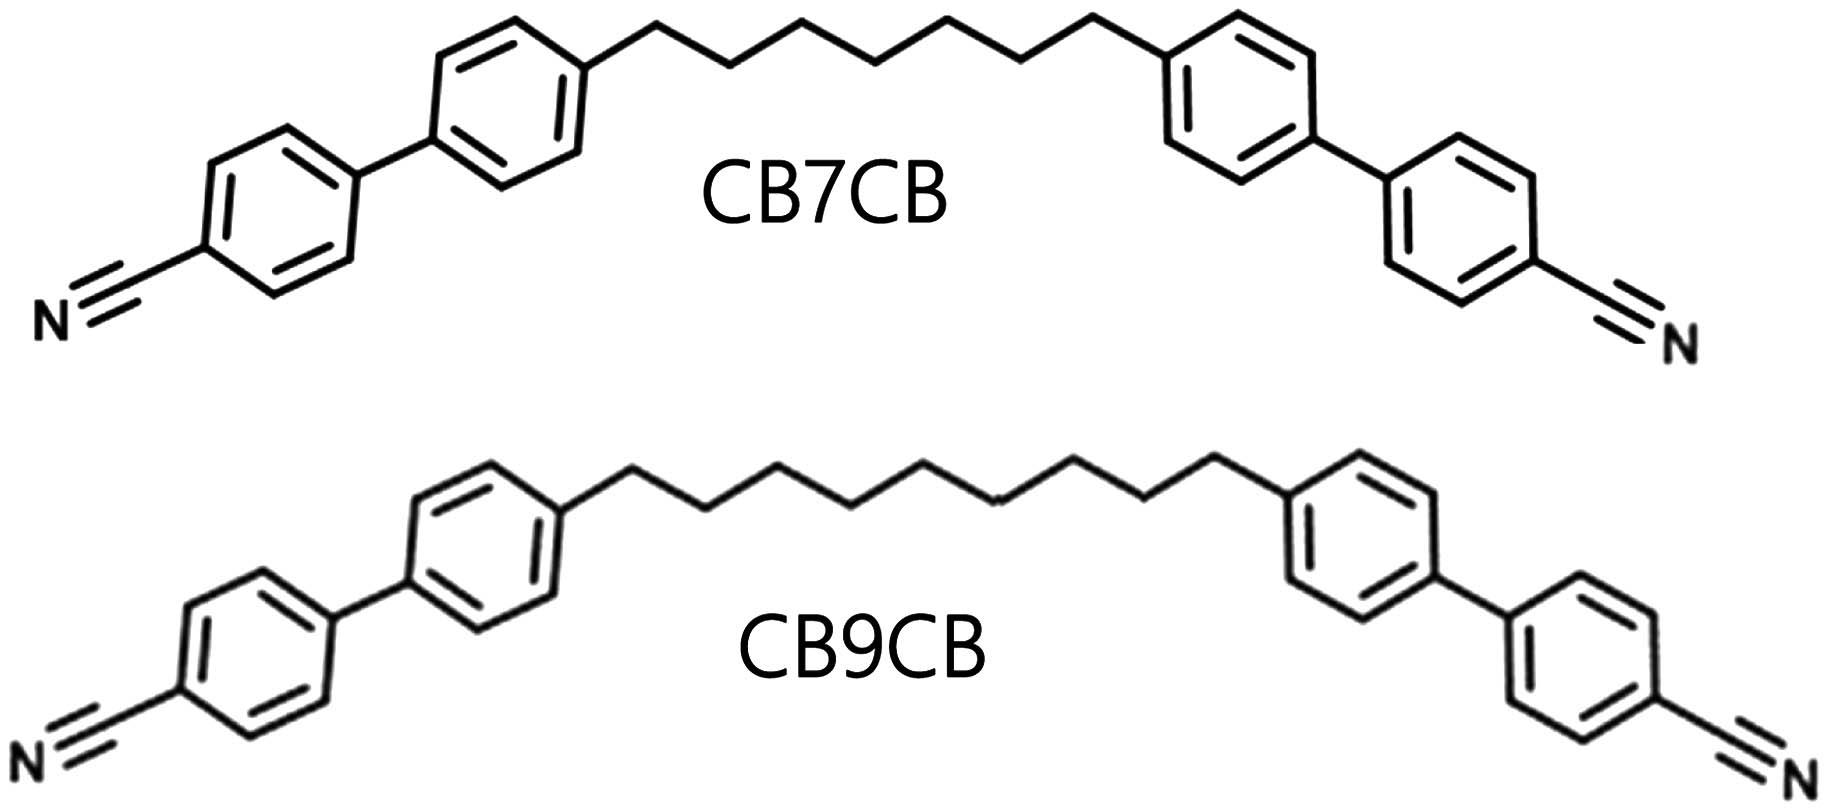 Chemical structure of liquid crystal dimers CB7CB and CB9CB.